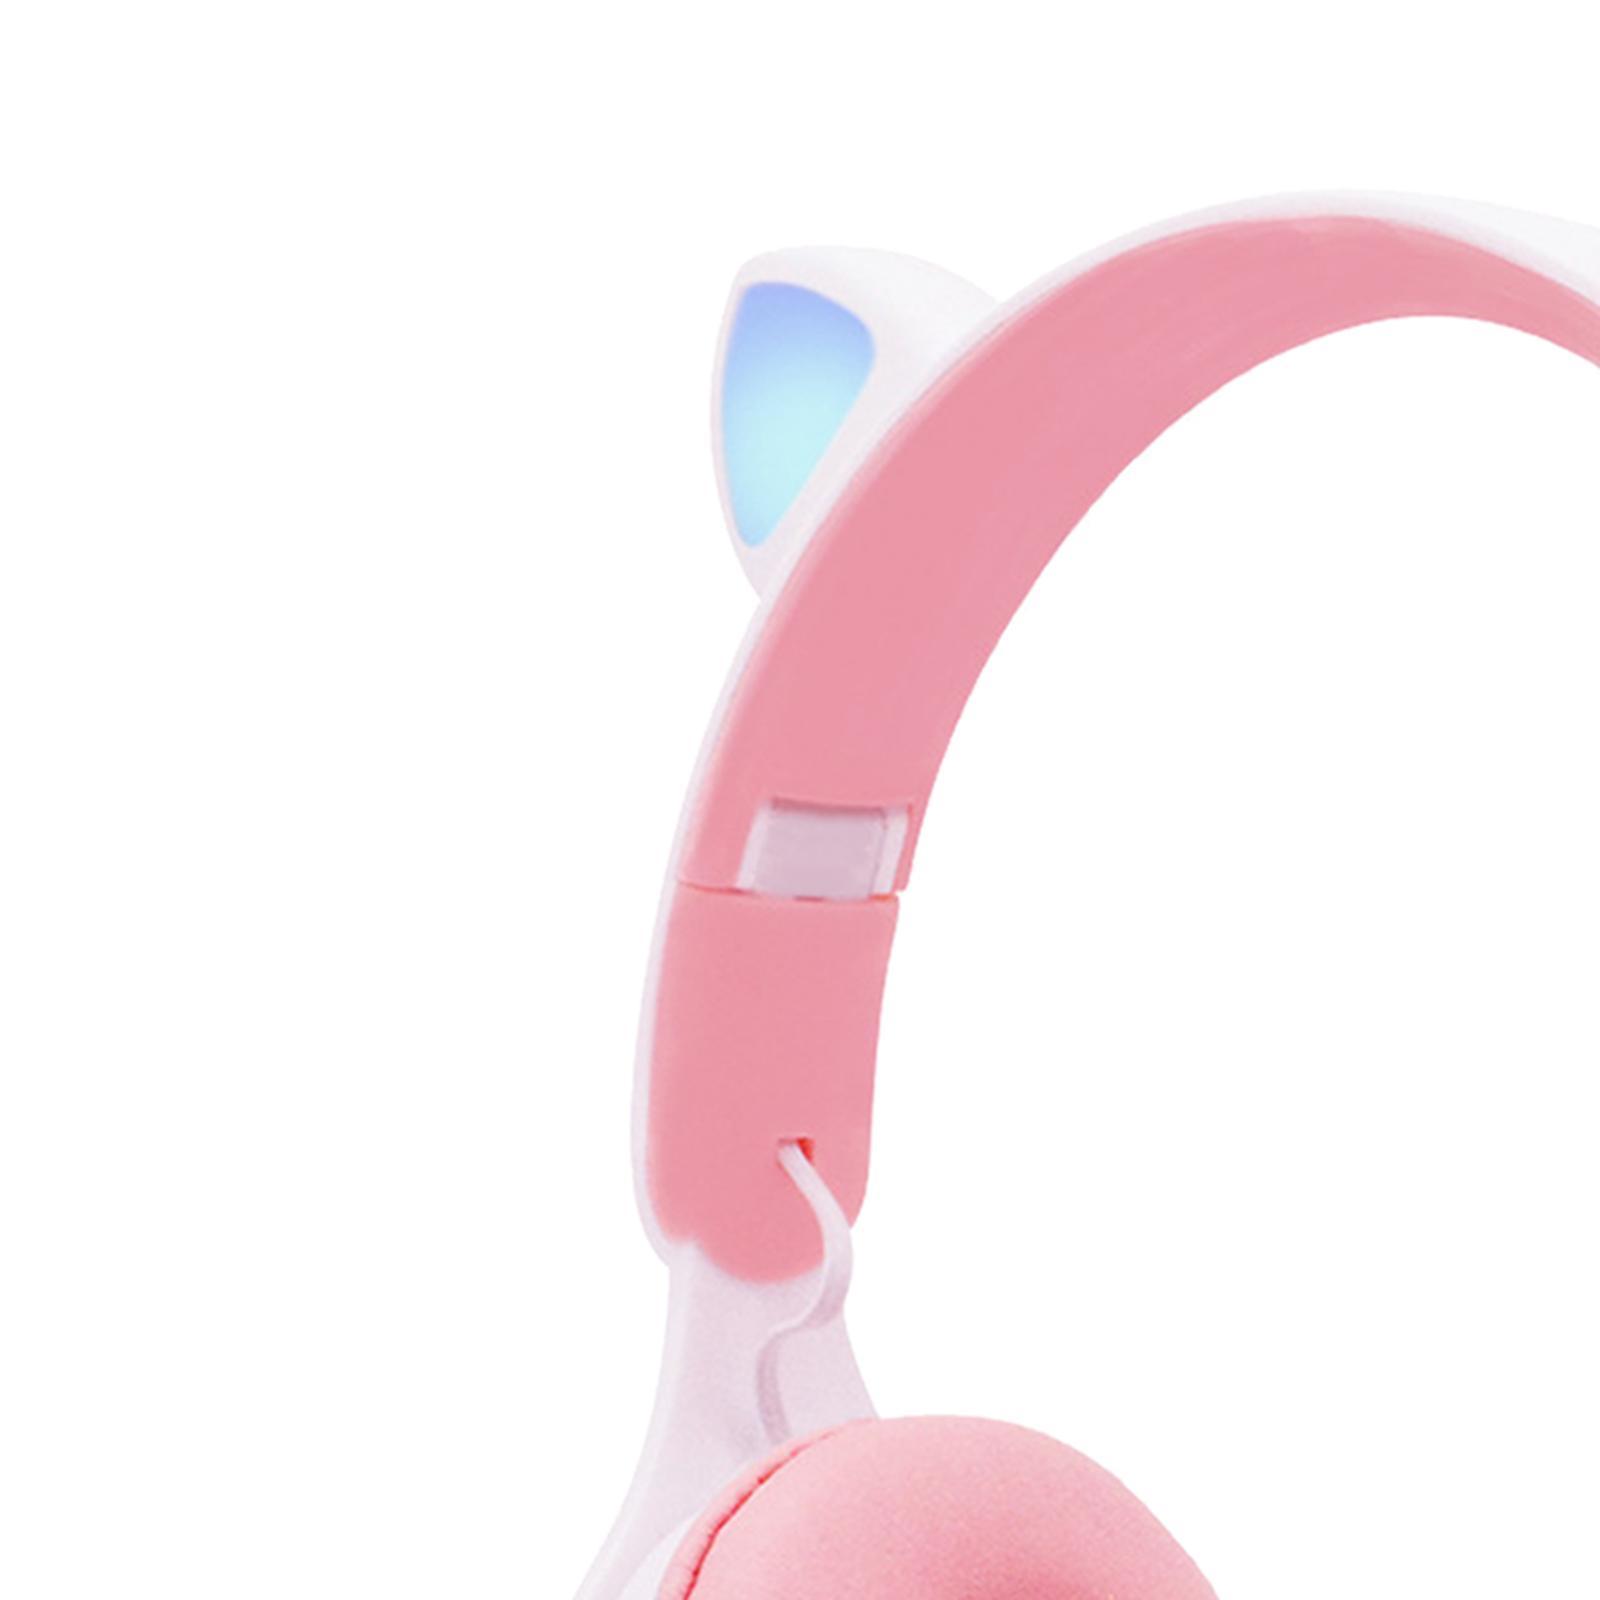 2 Sets Cat Ear LED Light Up Wireless Foldable Headphones Over-Ear with Mic